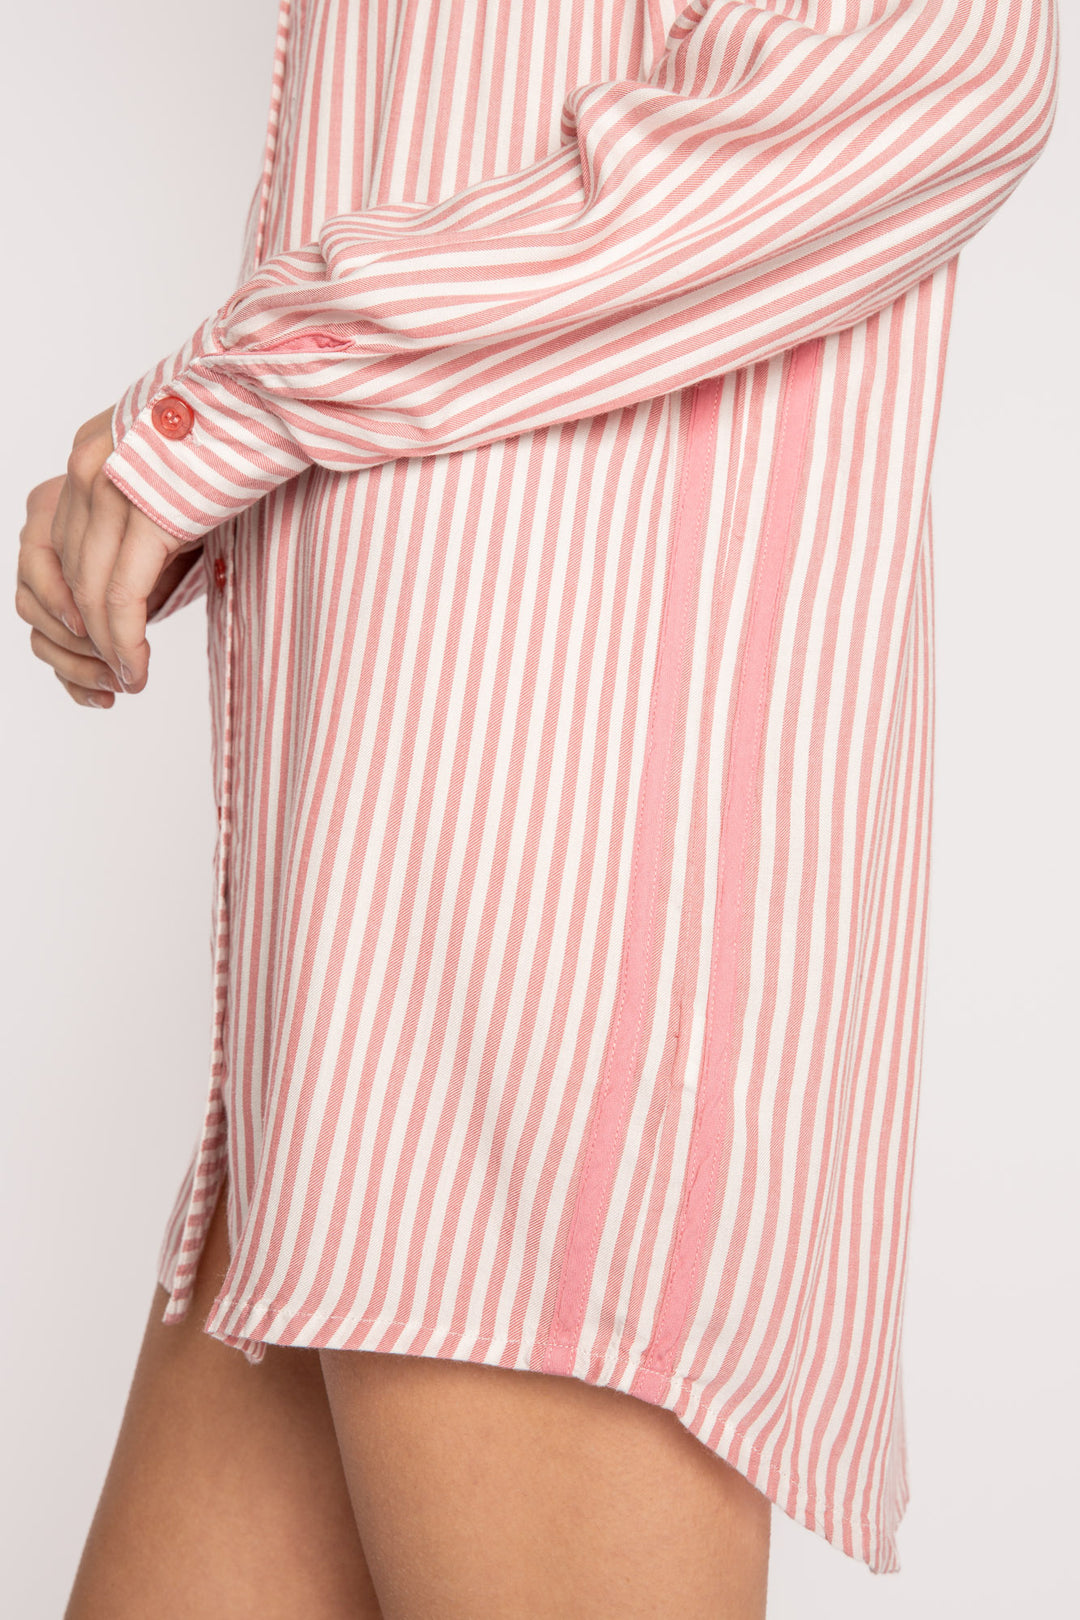 Ivory-red striped woven night shirt. Button front, chest pocket & rounded hem. Heart embroidered collar. (7257680543844)